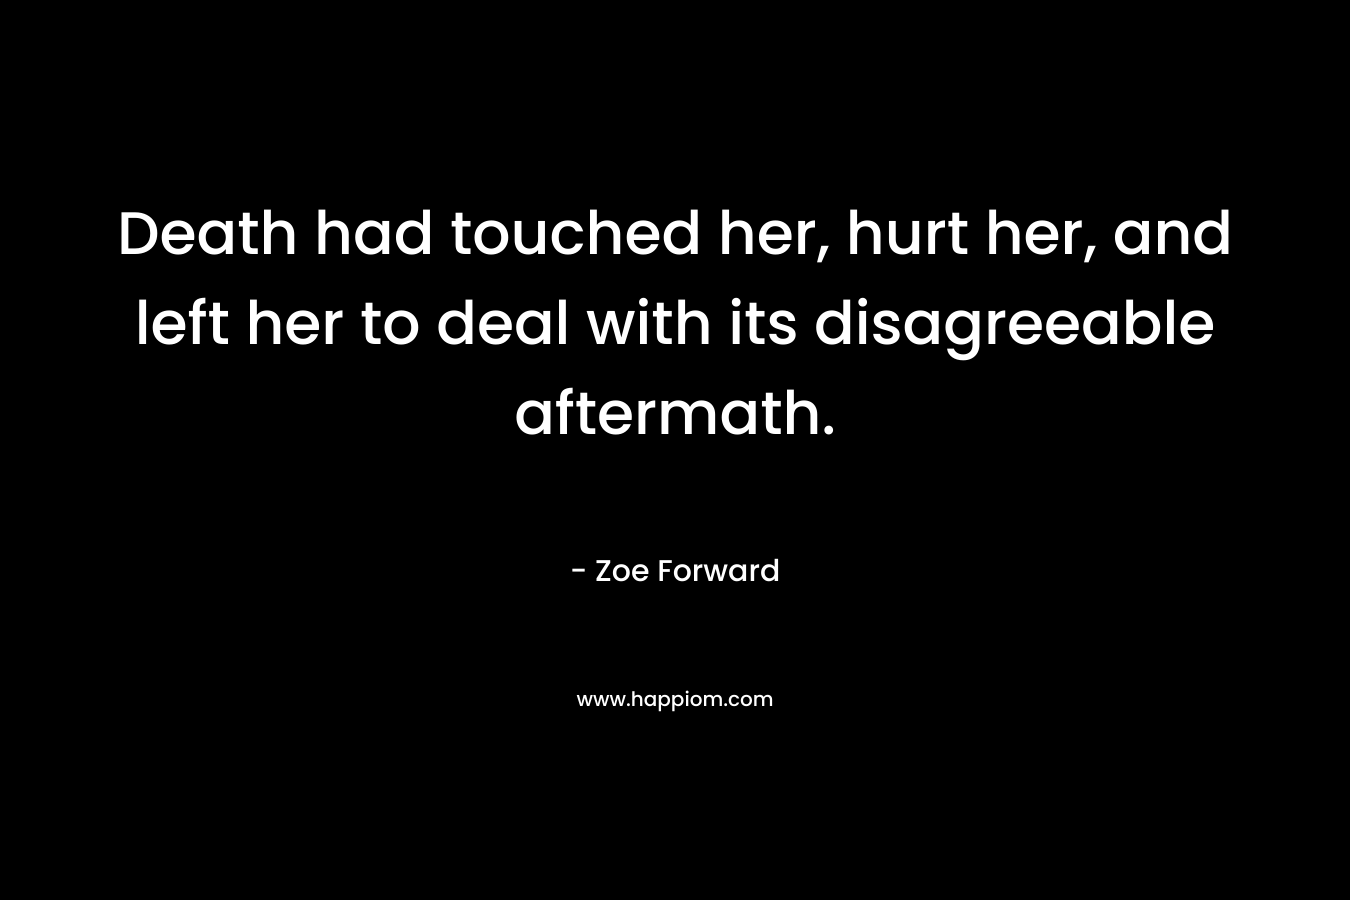 Death had touched her, hurt her, and left her to deal with its disagreeable aftermath. – Zoe Forward